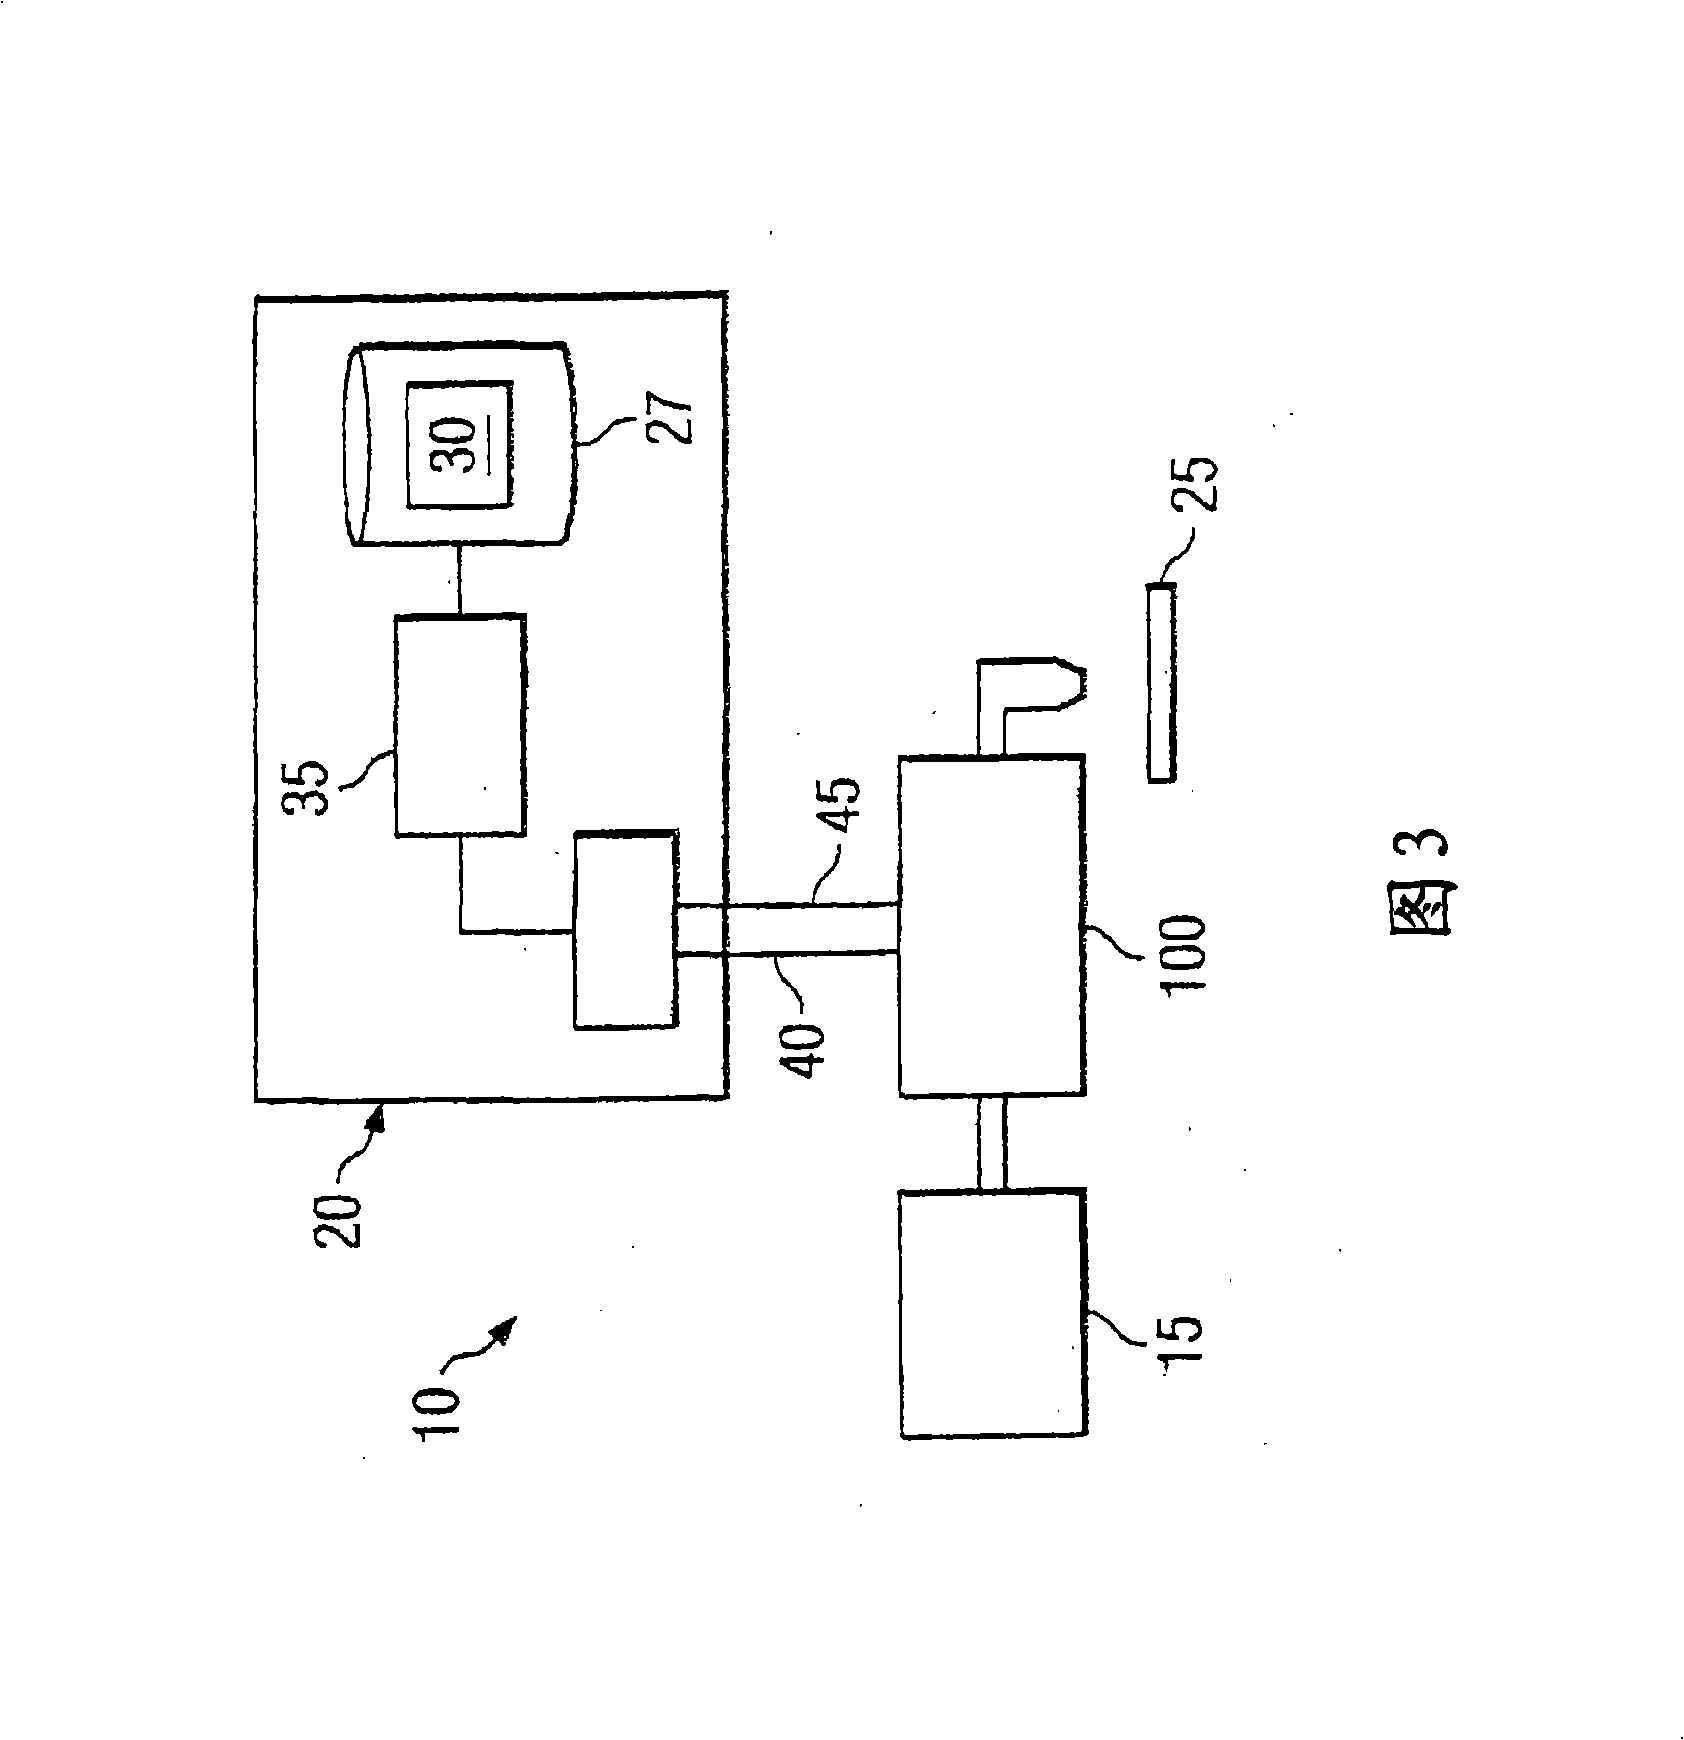 Systen and method for position control of a mechanical piston in a pump